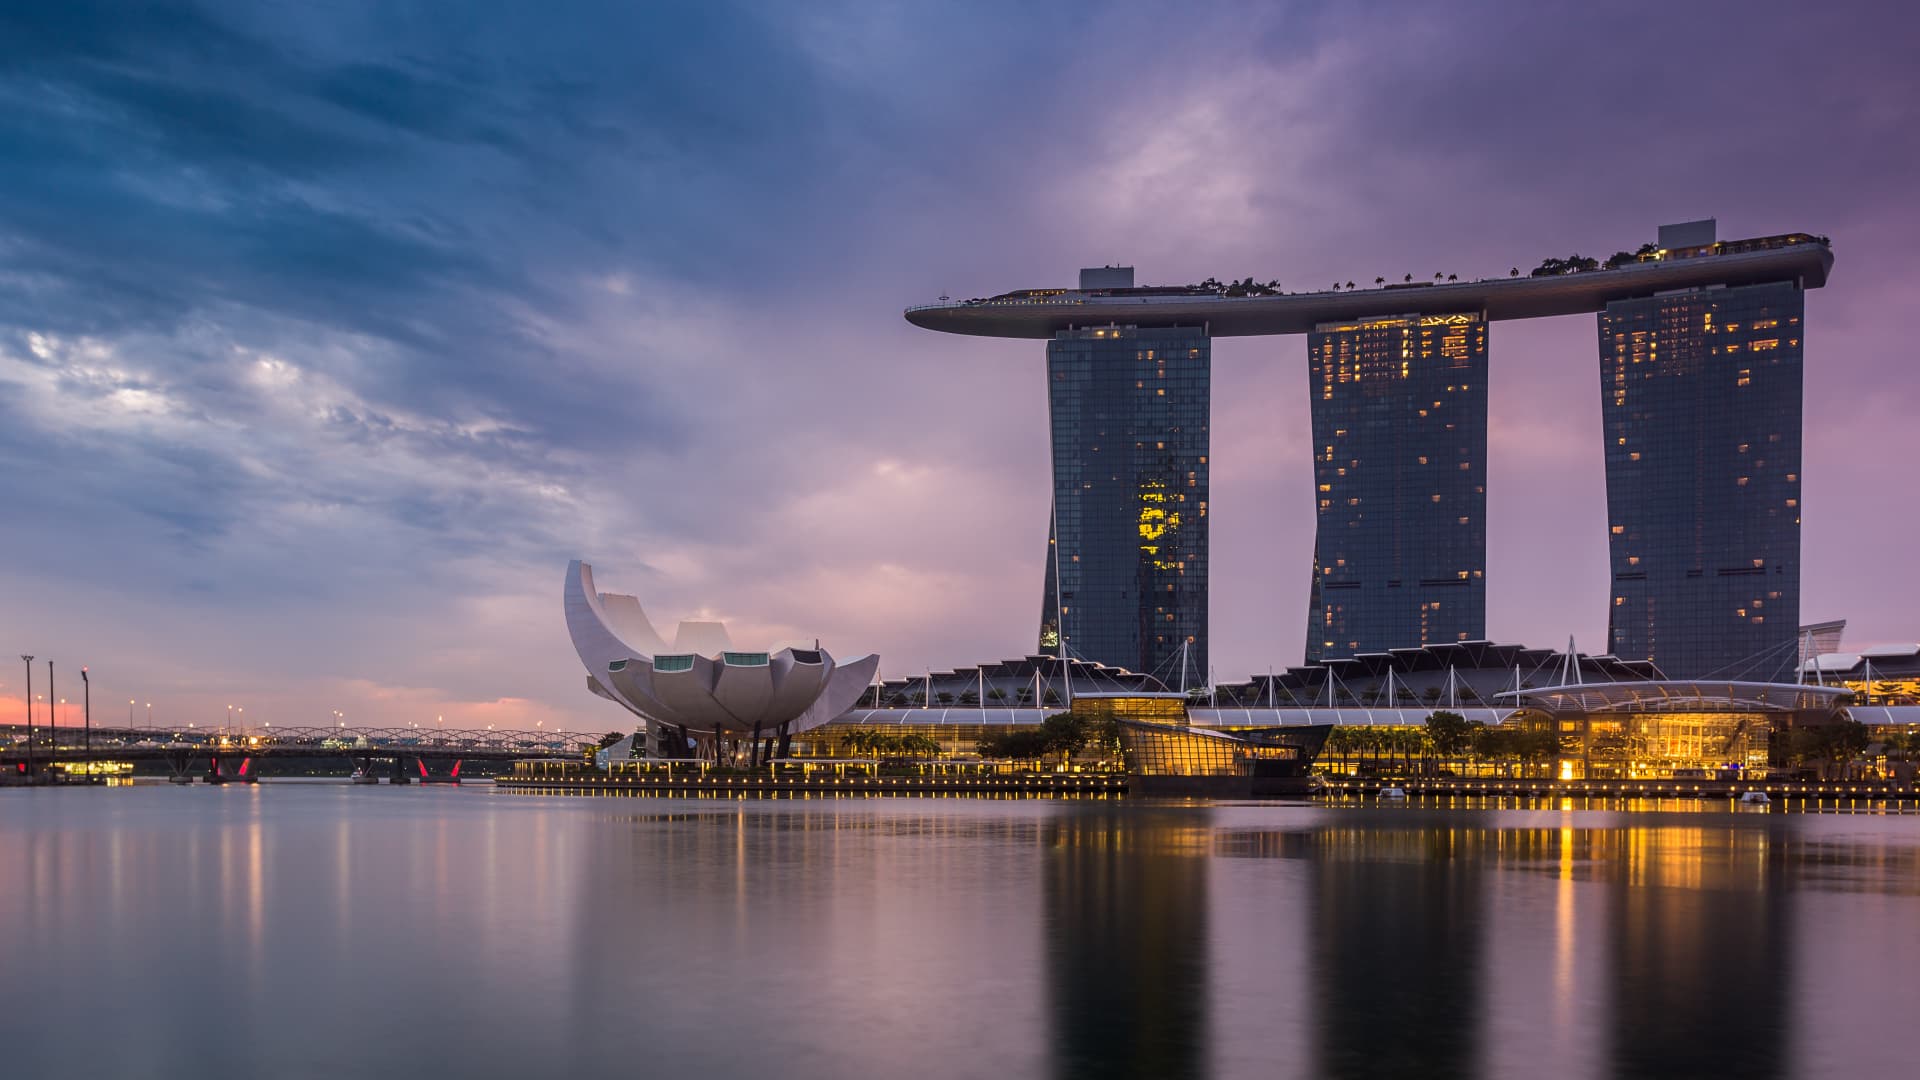 Singapore is now the realm’s freest economy, displacing Hong Kong after 53 years